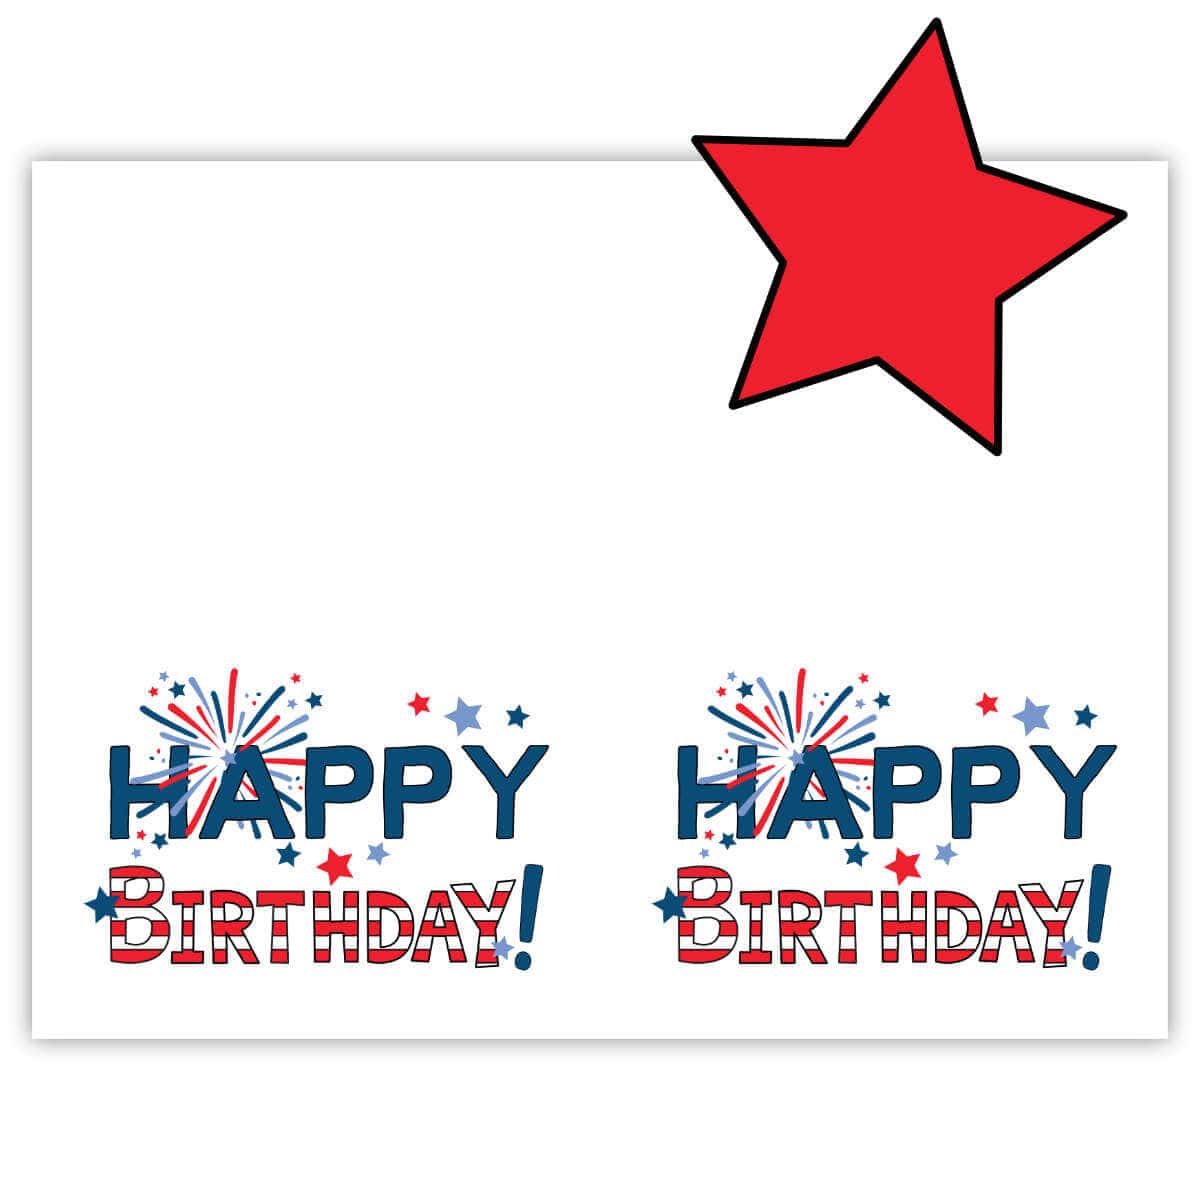 Two 4th of July Happy Birthday cards on one printable sheet of paper with a red clipart star.